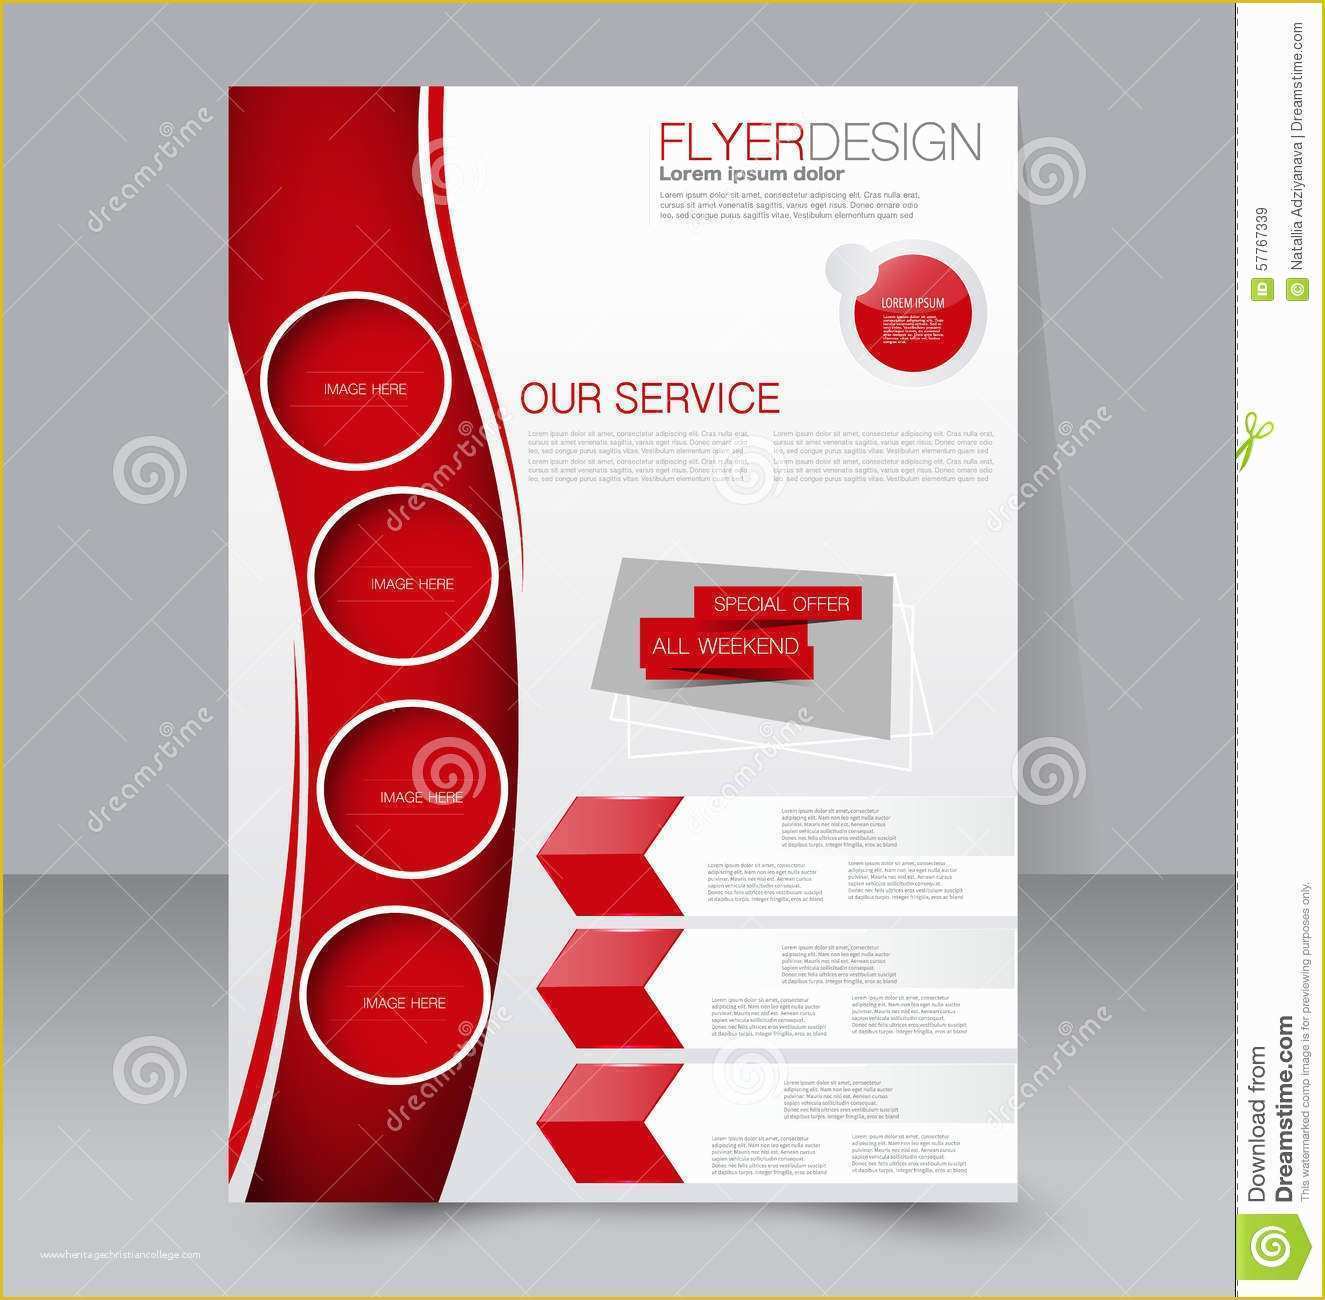 Free Flyer Brochure Templates Of Stock Flyer Templates Yourweek D81b0ceca25e